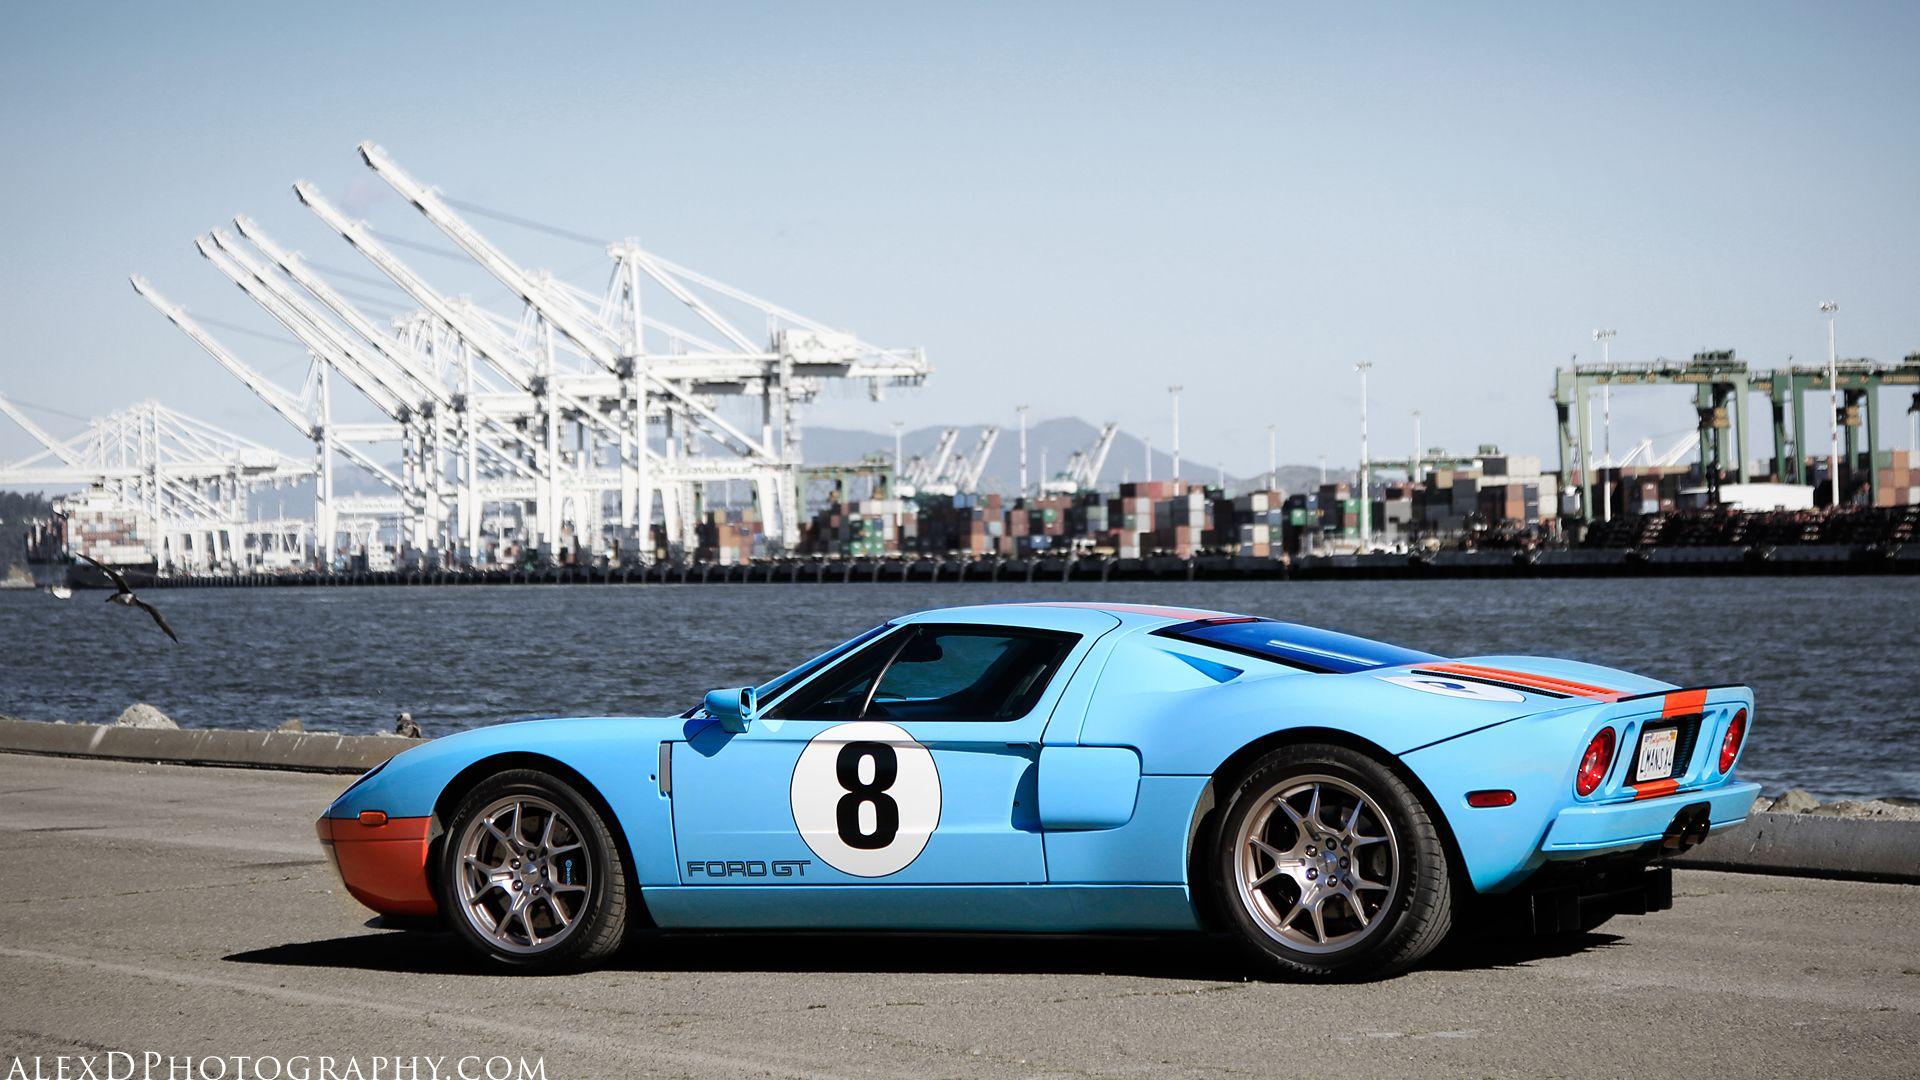 Ford GT with optional 'heritage' paint scheme; classic Gulf orange